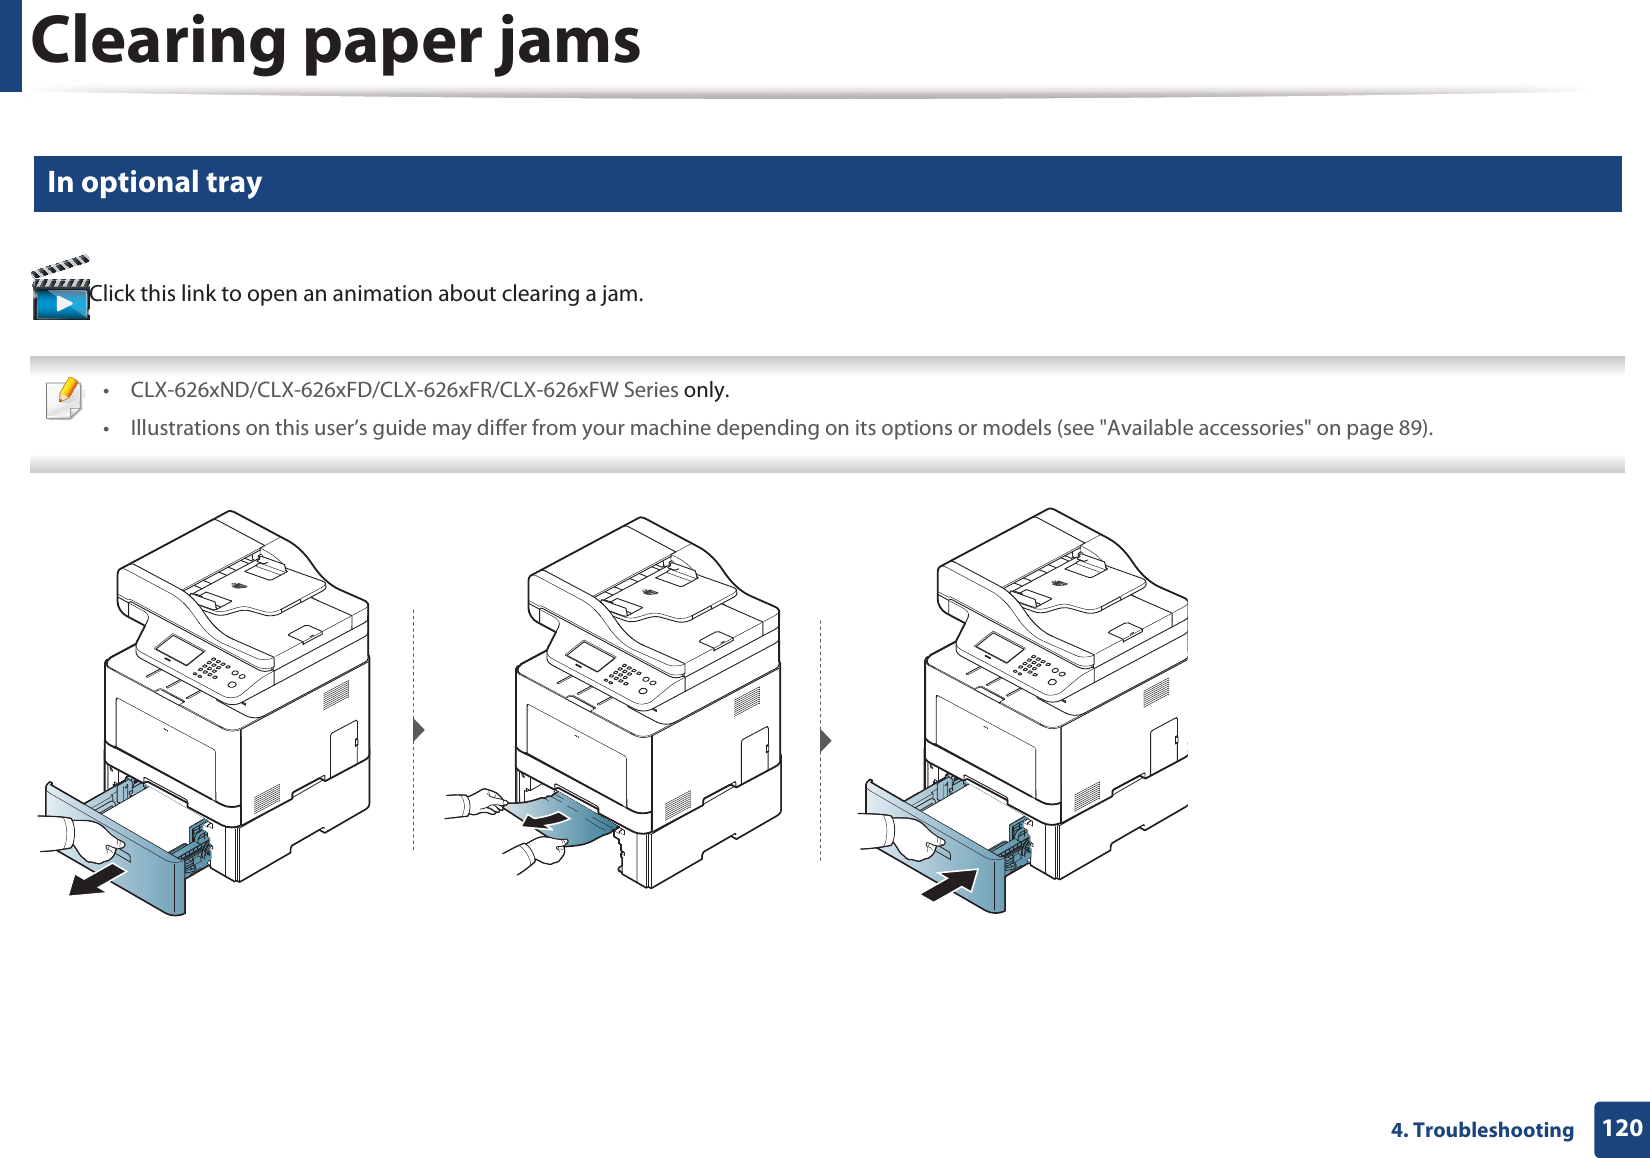 Clearing paper jams1204. Troubleshooting6 In optional trayClick this link to open an animation about clearing a jam. • CLX-626xND/CLX-626xFD/CLX-626xFR/CLX-626xFW Series only.• Illustrations on this user’s guide may differ from your machine depending on its options or models (see &quot;Available accessories&quot; on page 89). 